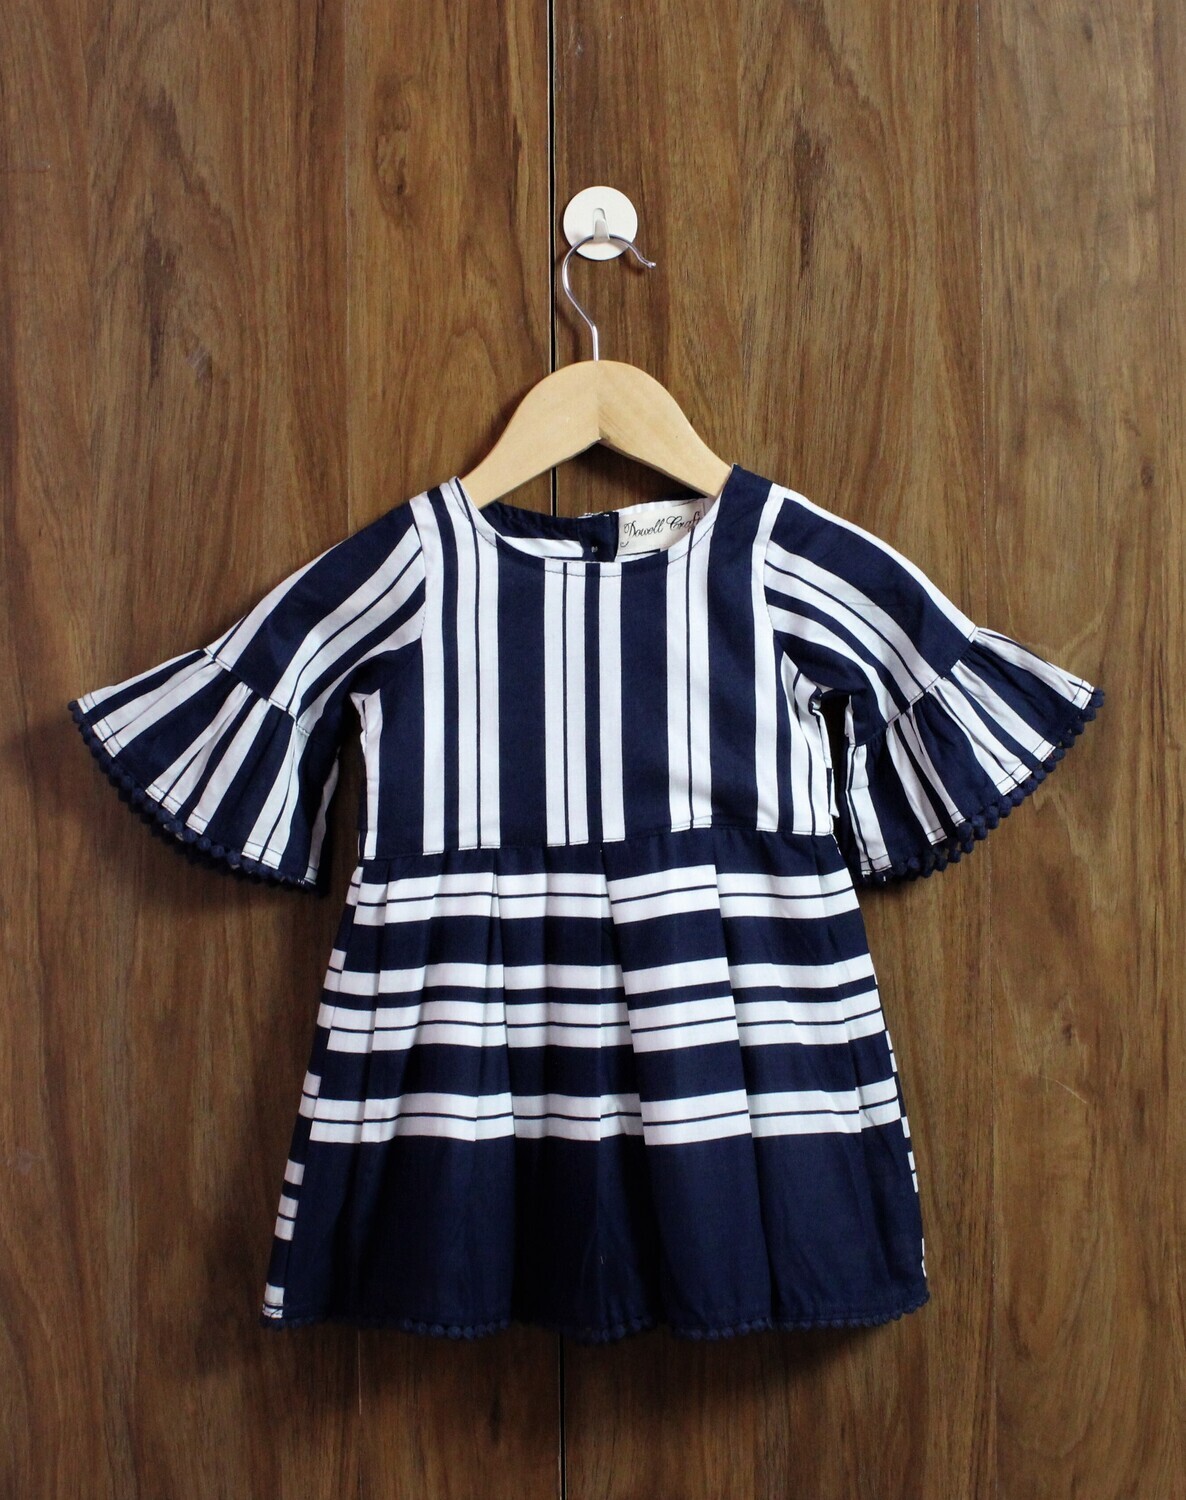 Bell sleeve comfort dress(6 months to 2-3 Yrs.)